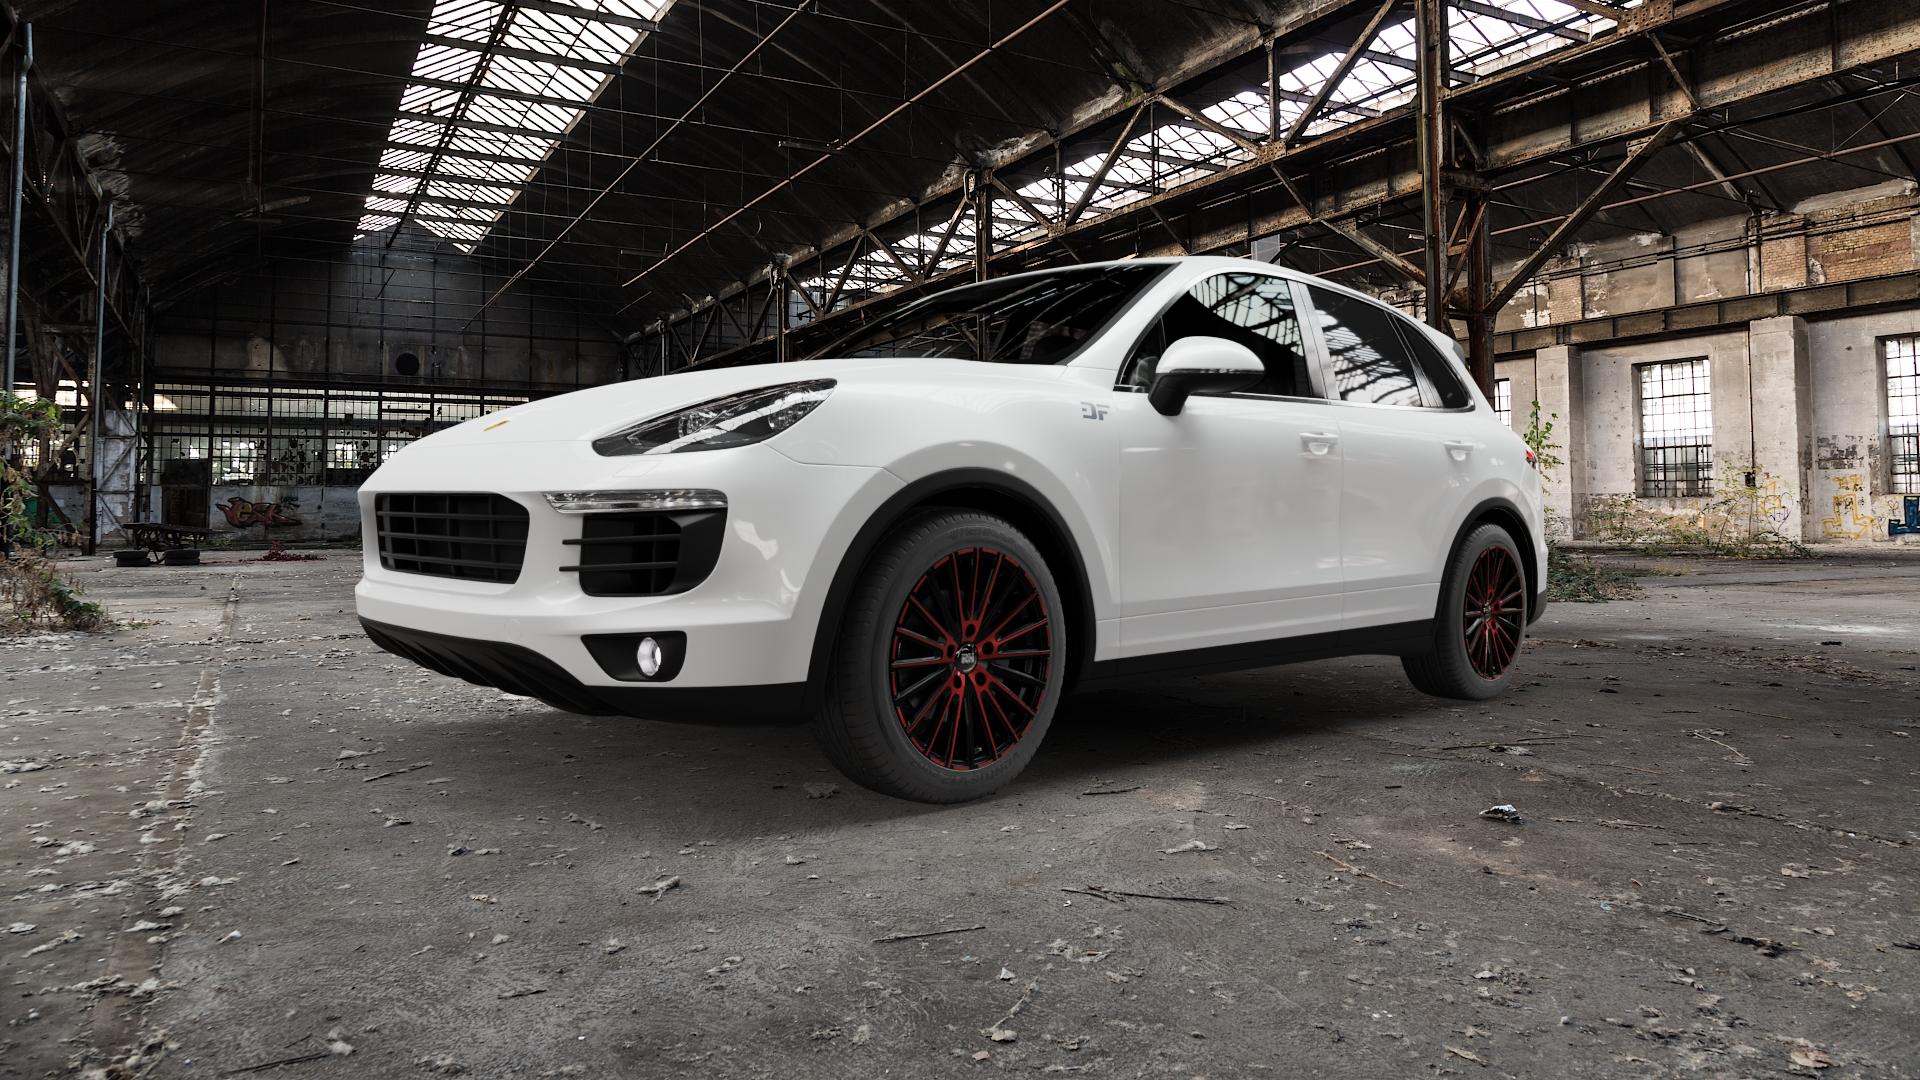 Porsche Cayenne II Type 92A 4,8l Turbo S 405kW (551 hp) Wheels and Tyre  Packages